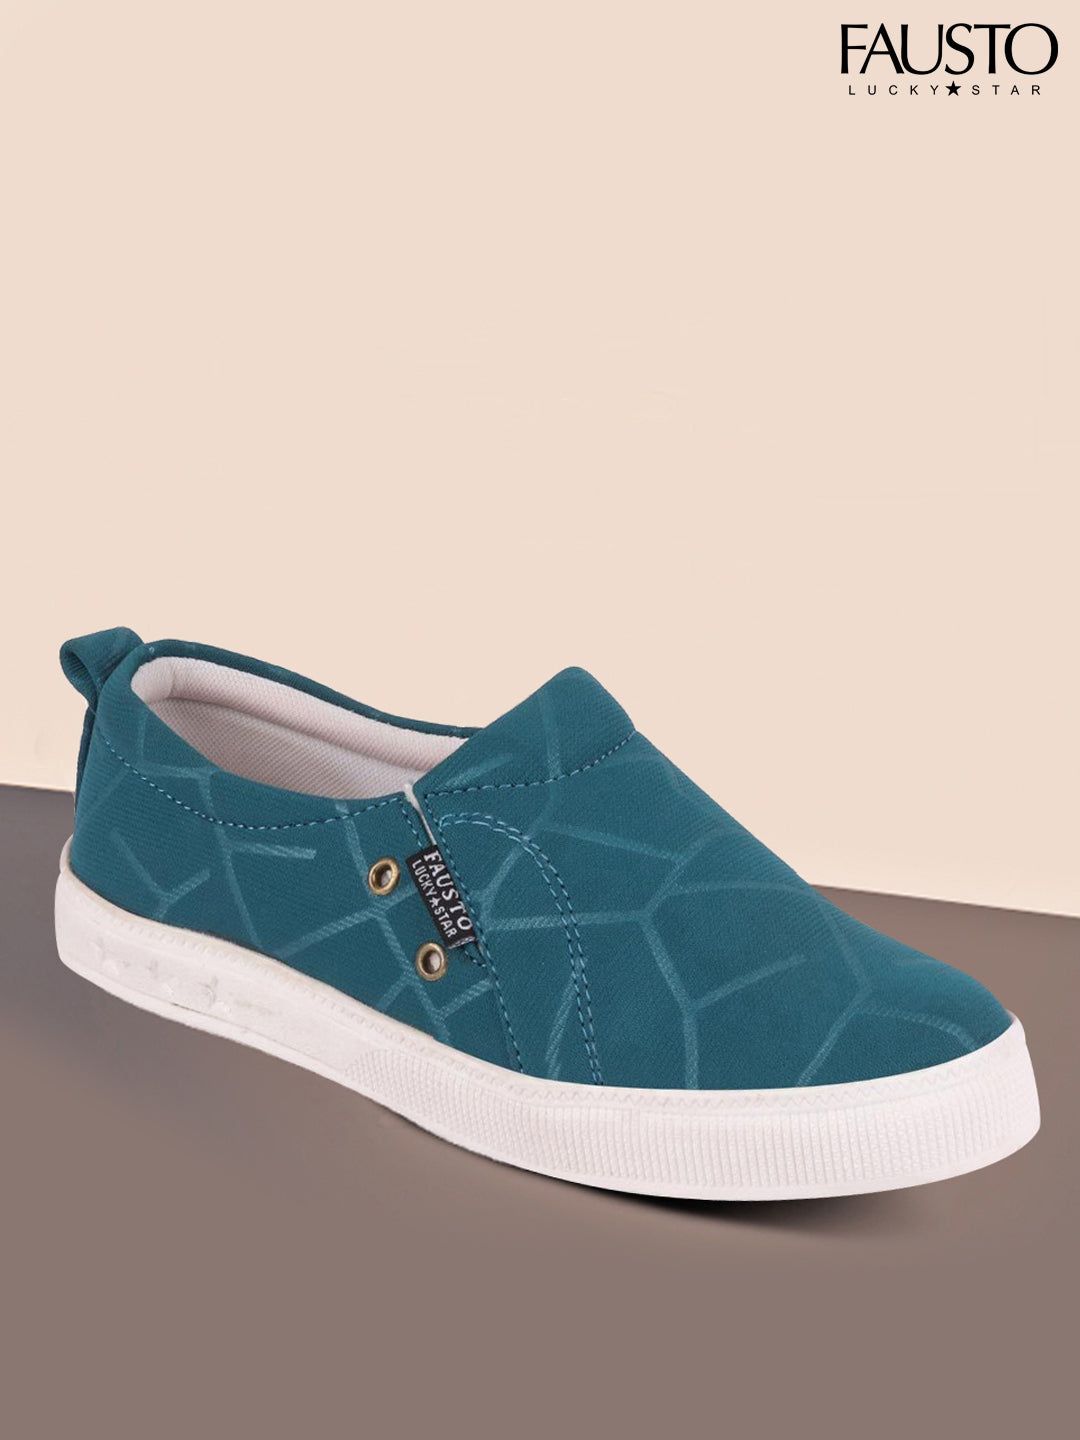 FAUSTO Women Blue Printed Slip-On Sneakers Price in India